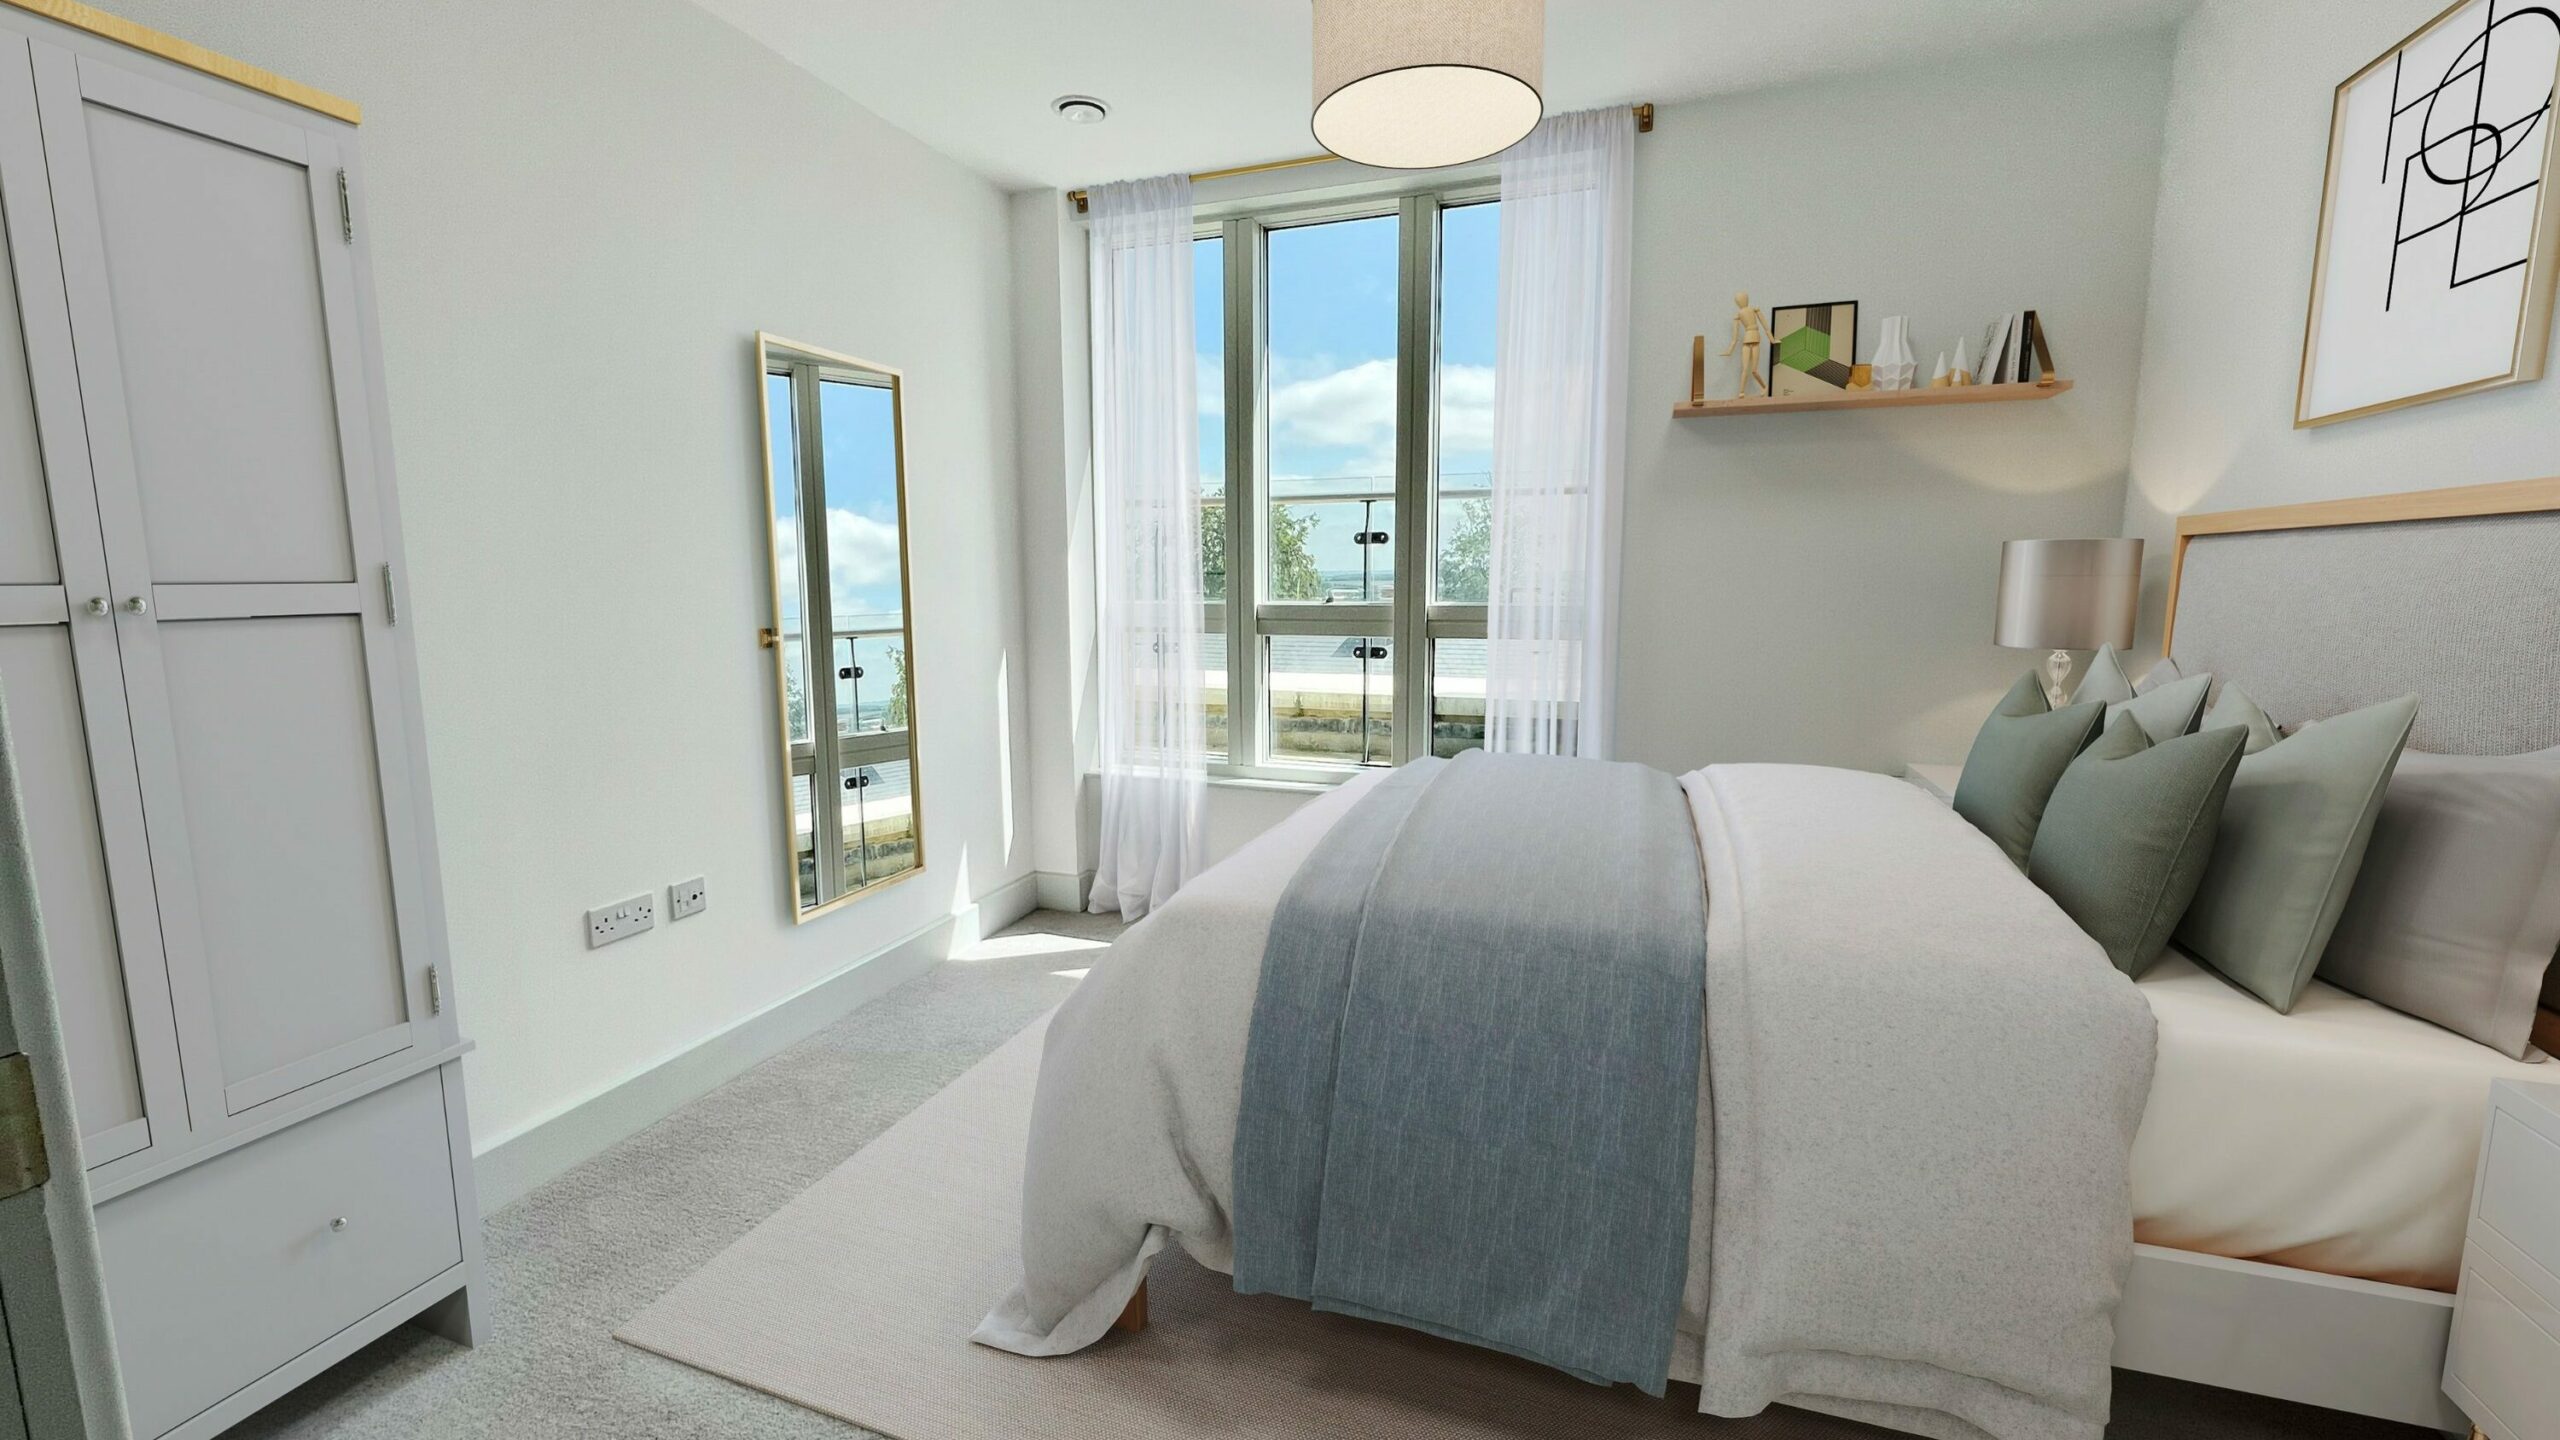 Image a bedroom at the Knights Quarter development from Sovereign - available to purchase through Shared Ownership on Share to Buy!